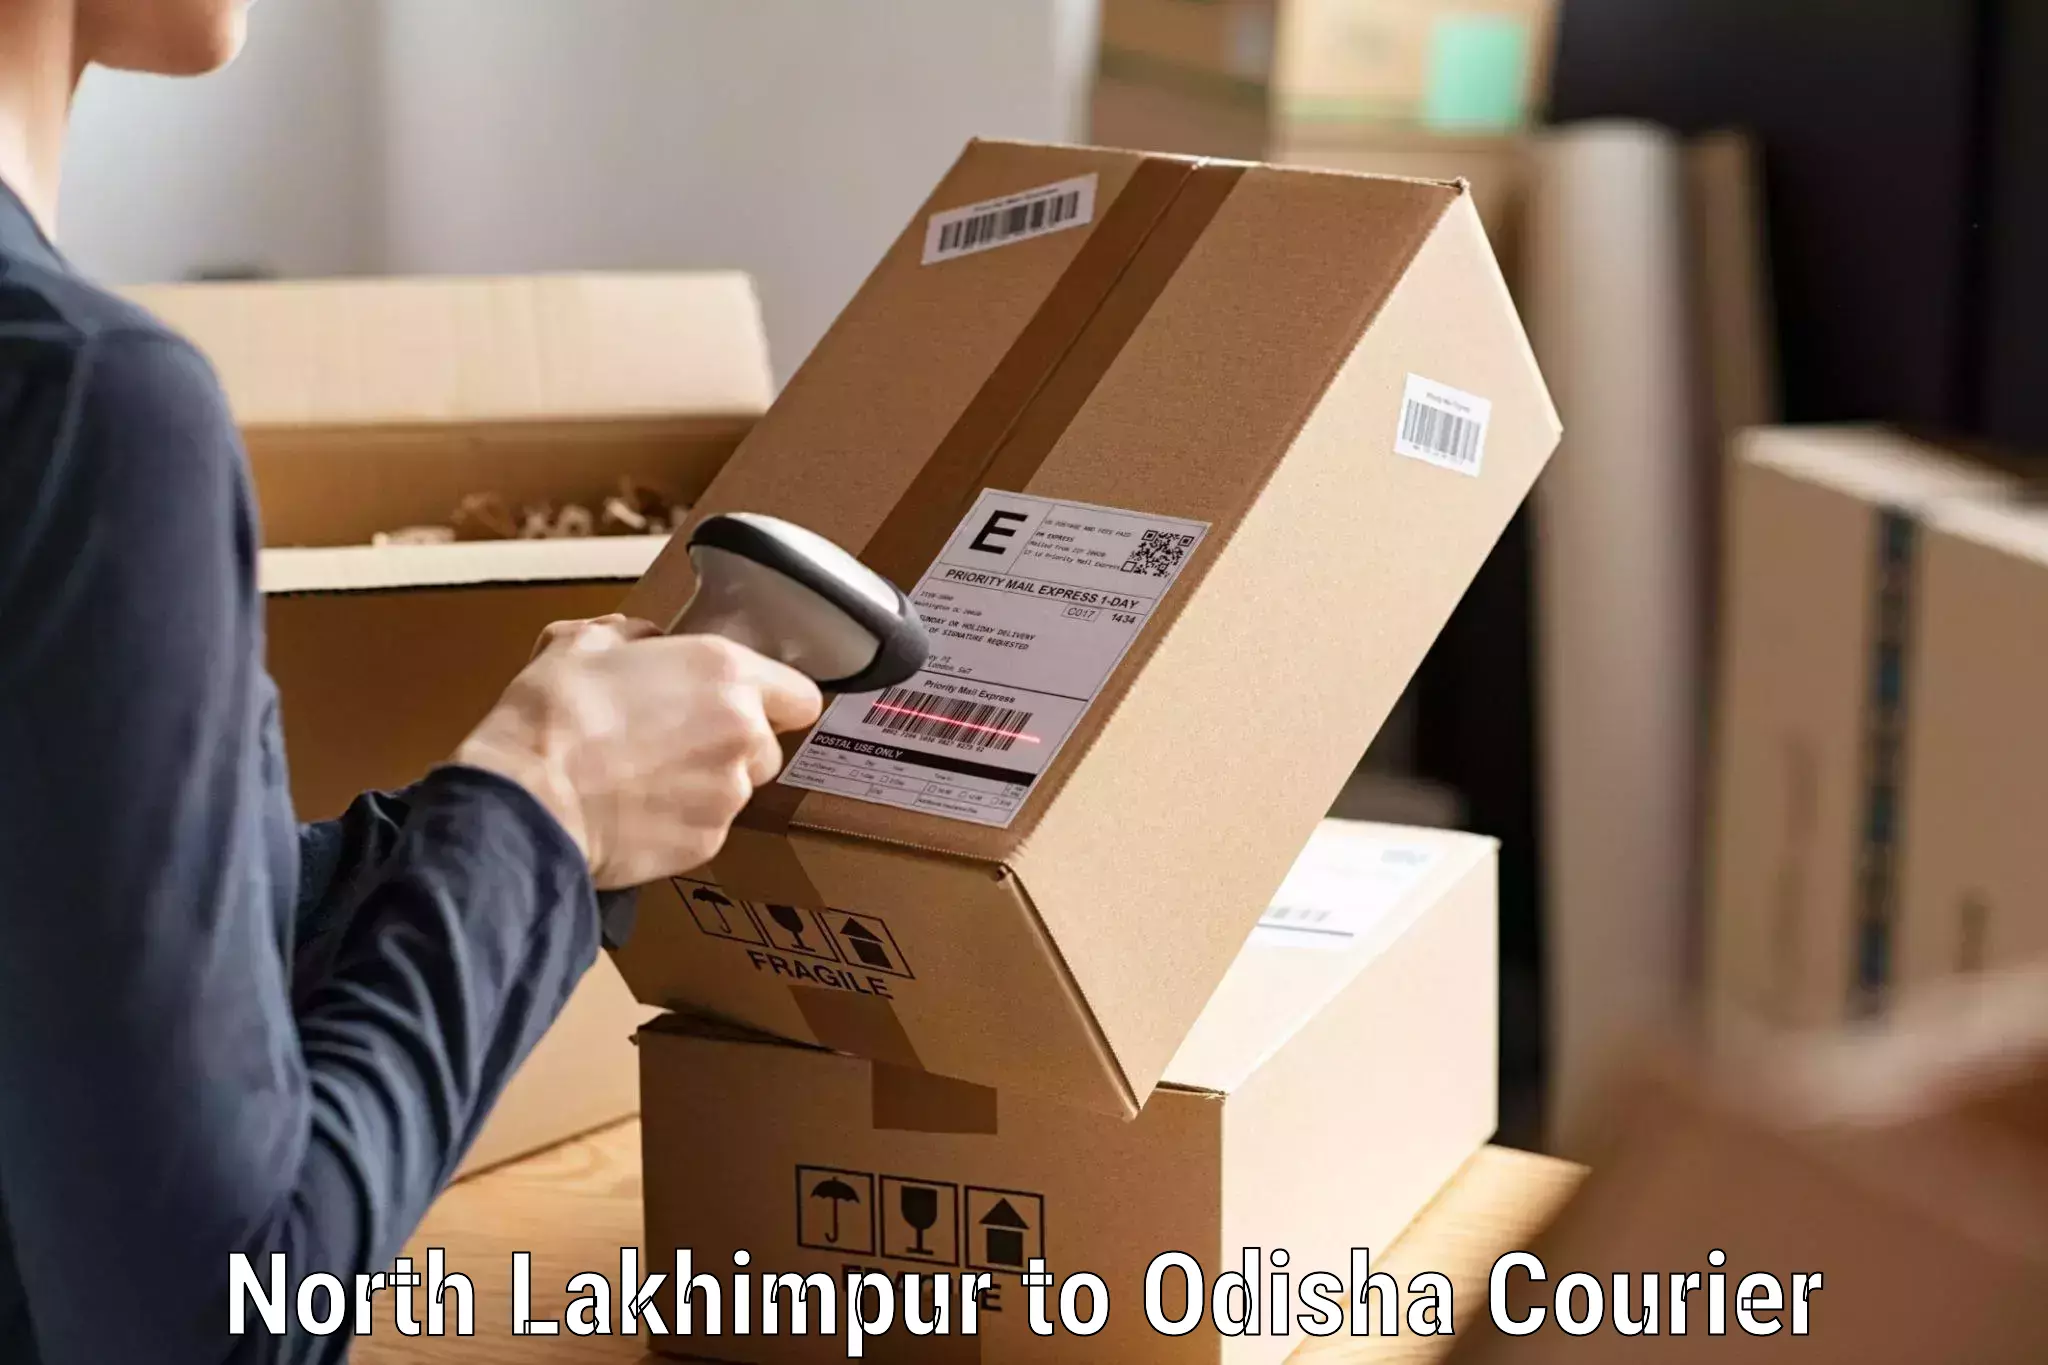 Courier service innovation in North Lakhimpur to Sonepur